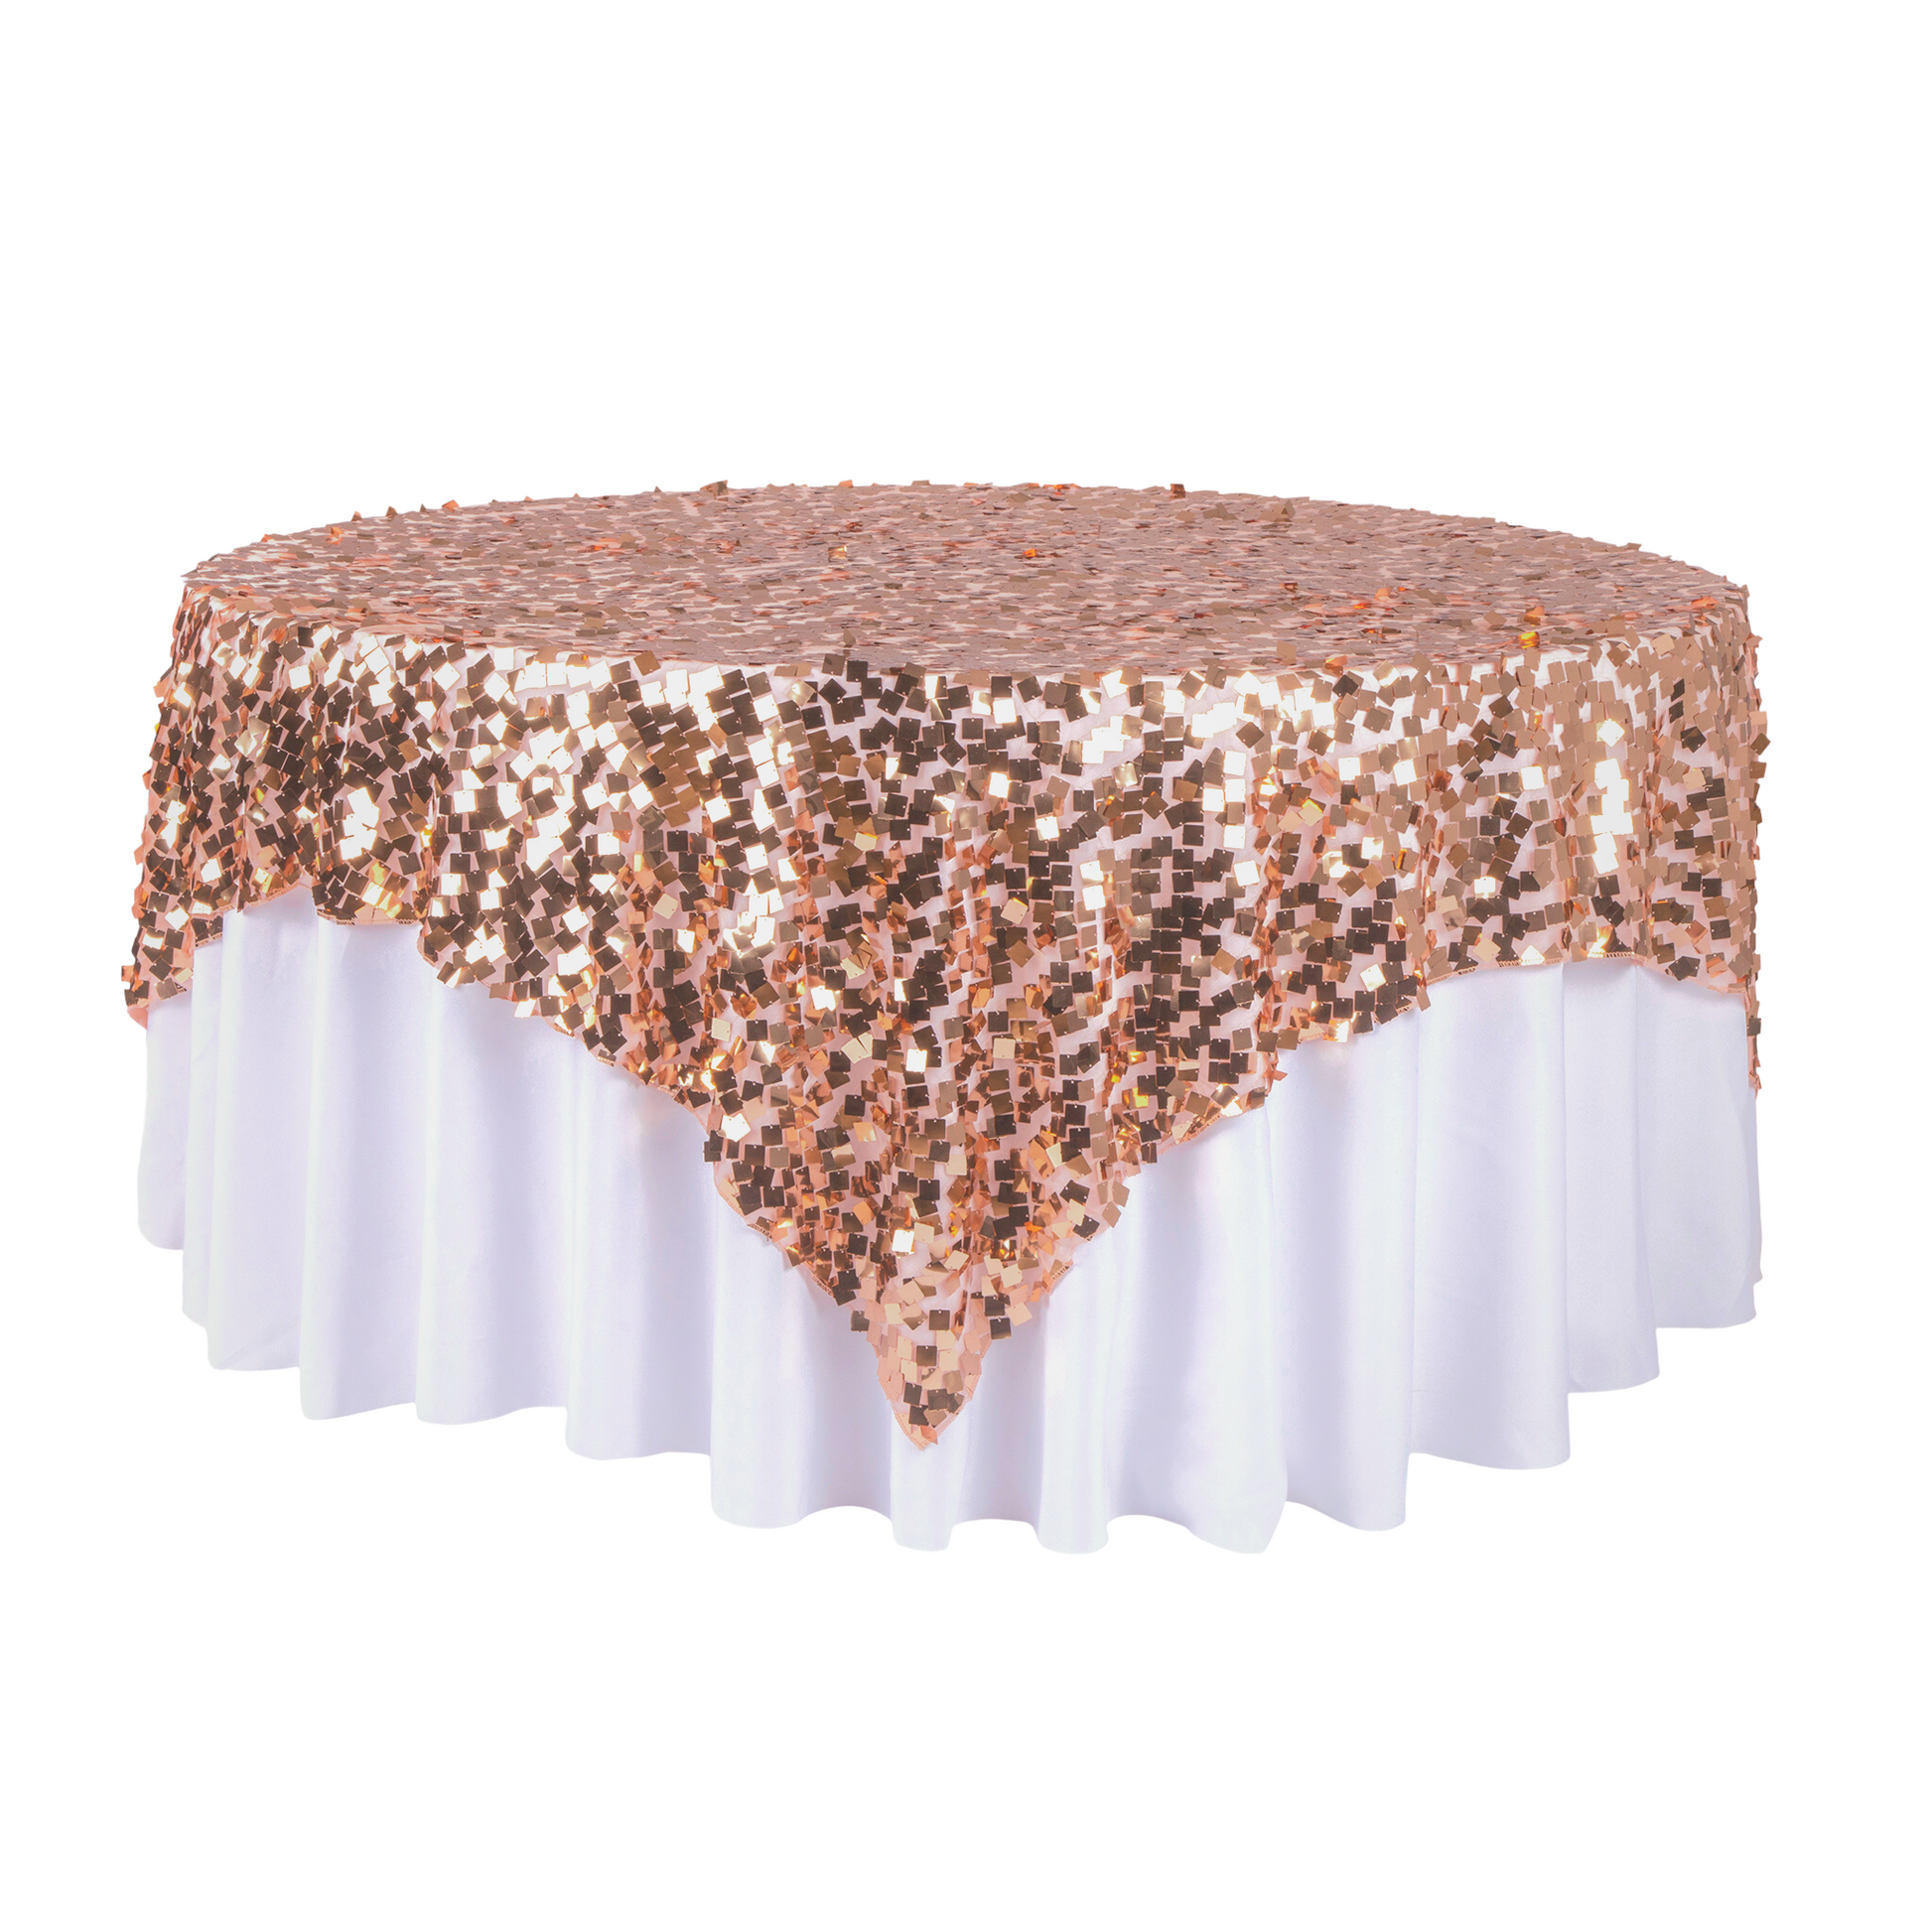 Square Payette Sequin Table Overlay Topper 90"x90" Square - Blush/Rose Gold